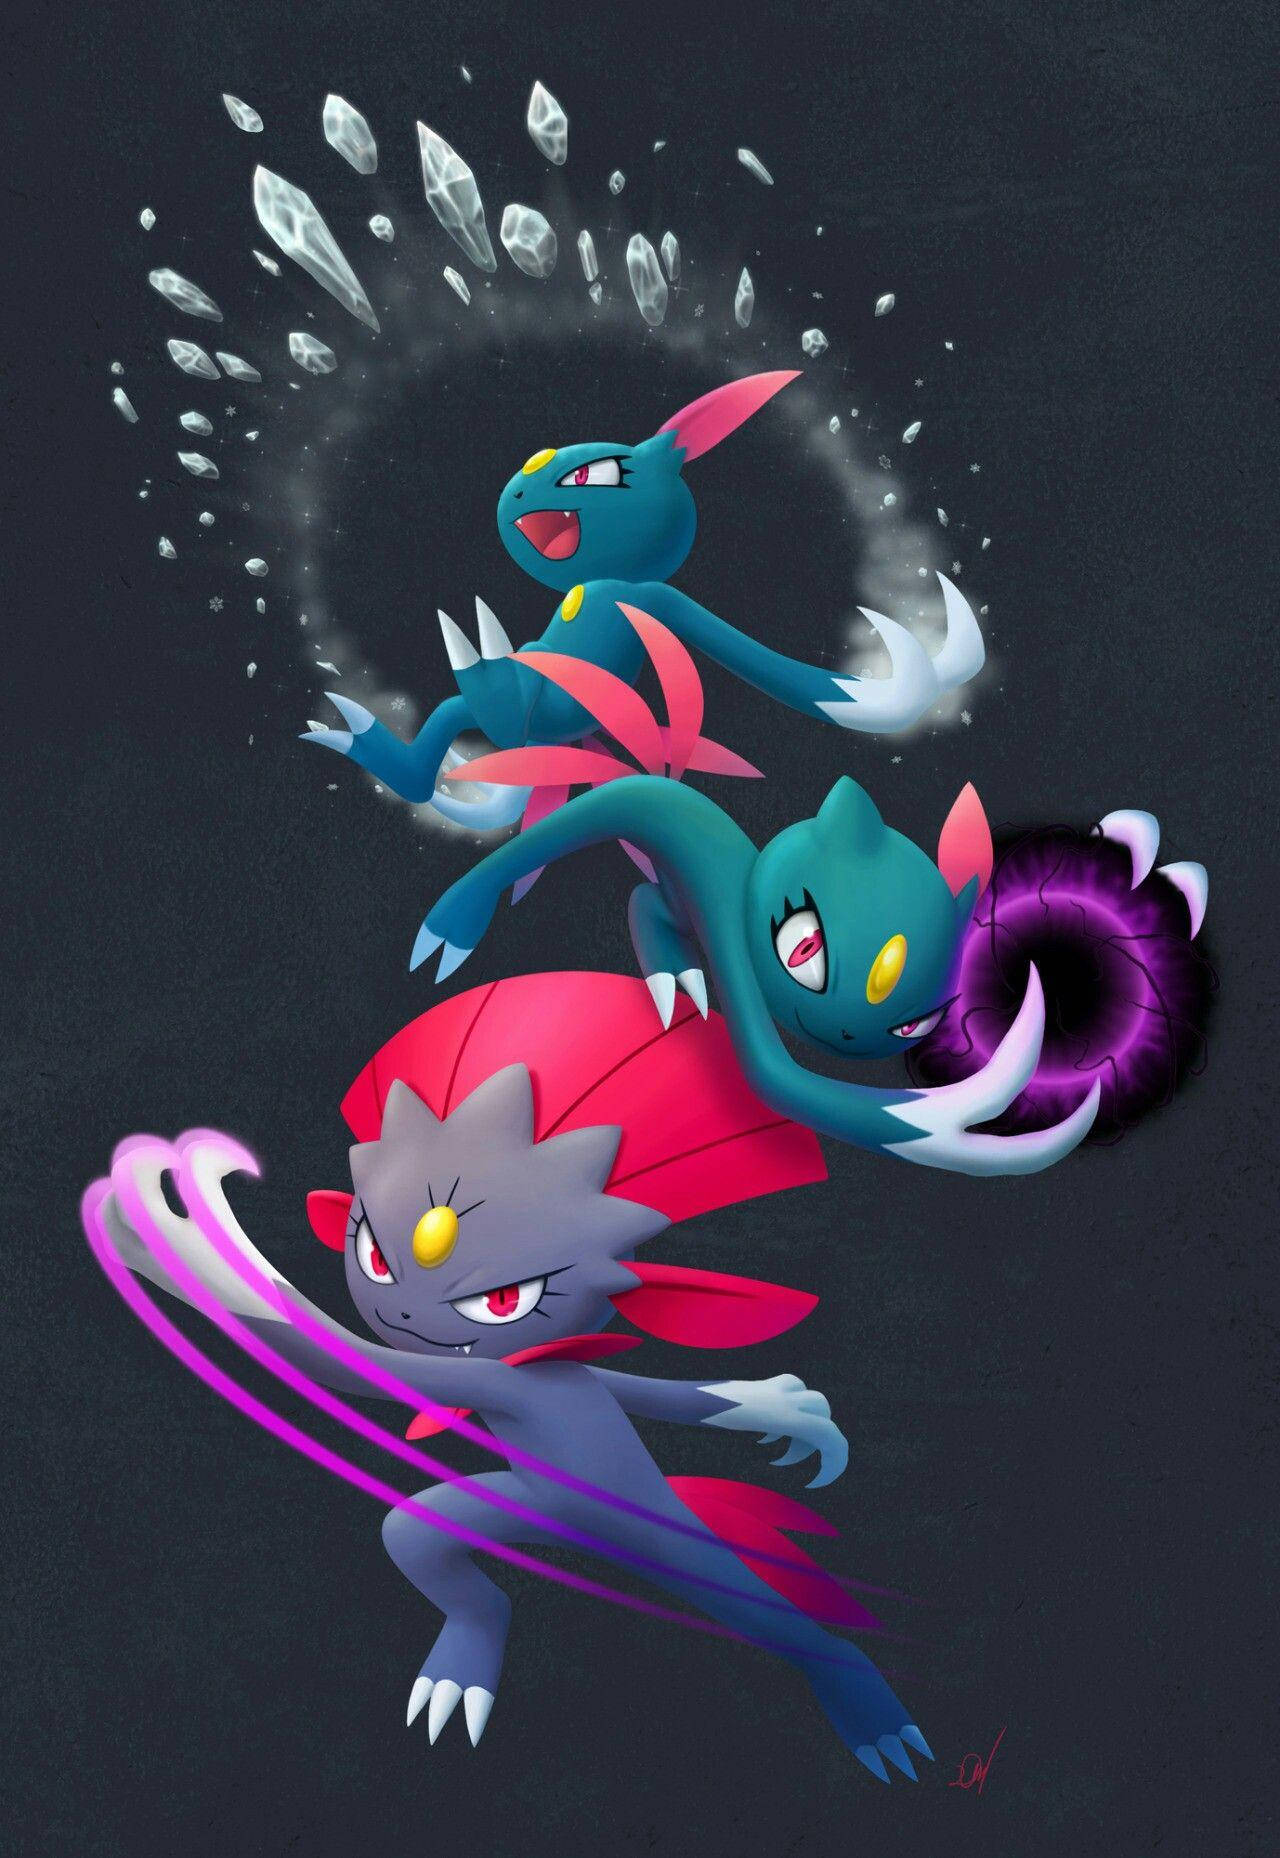 Weavileoch Sneasels (could Be The Title Of The Wallpaper Featuring These Pokemon) Wallpaper